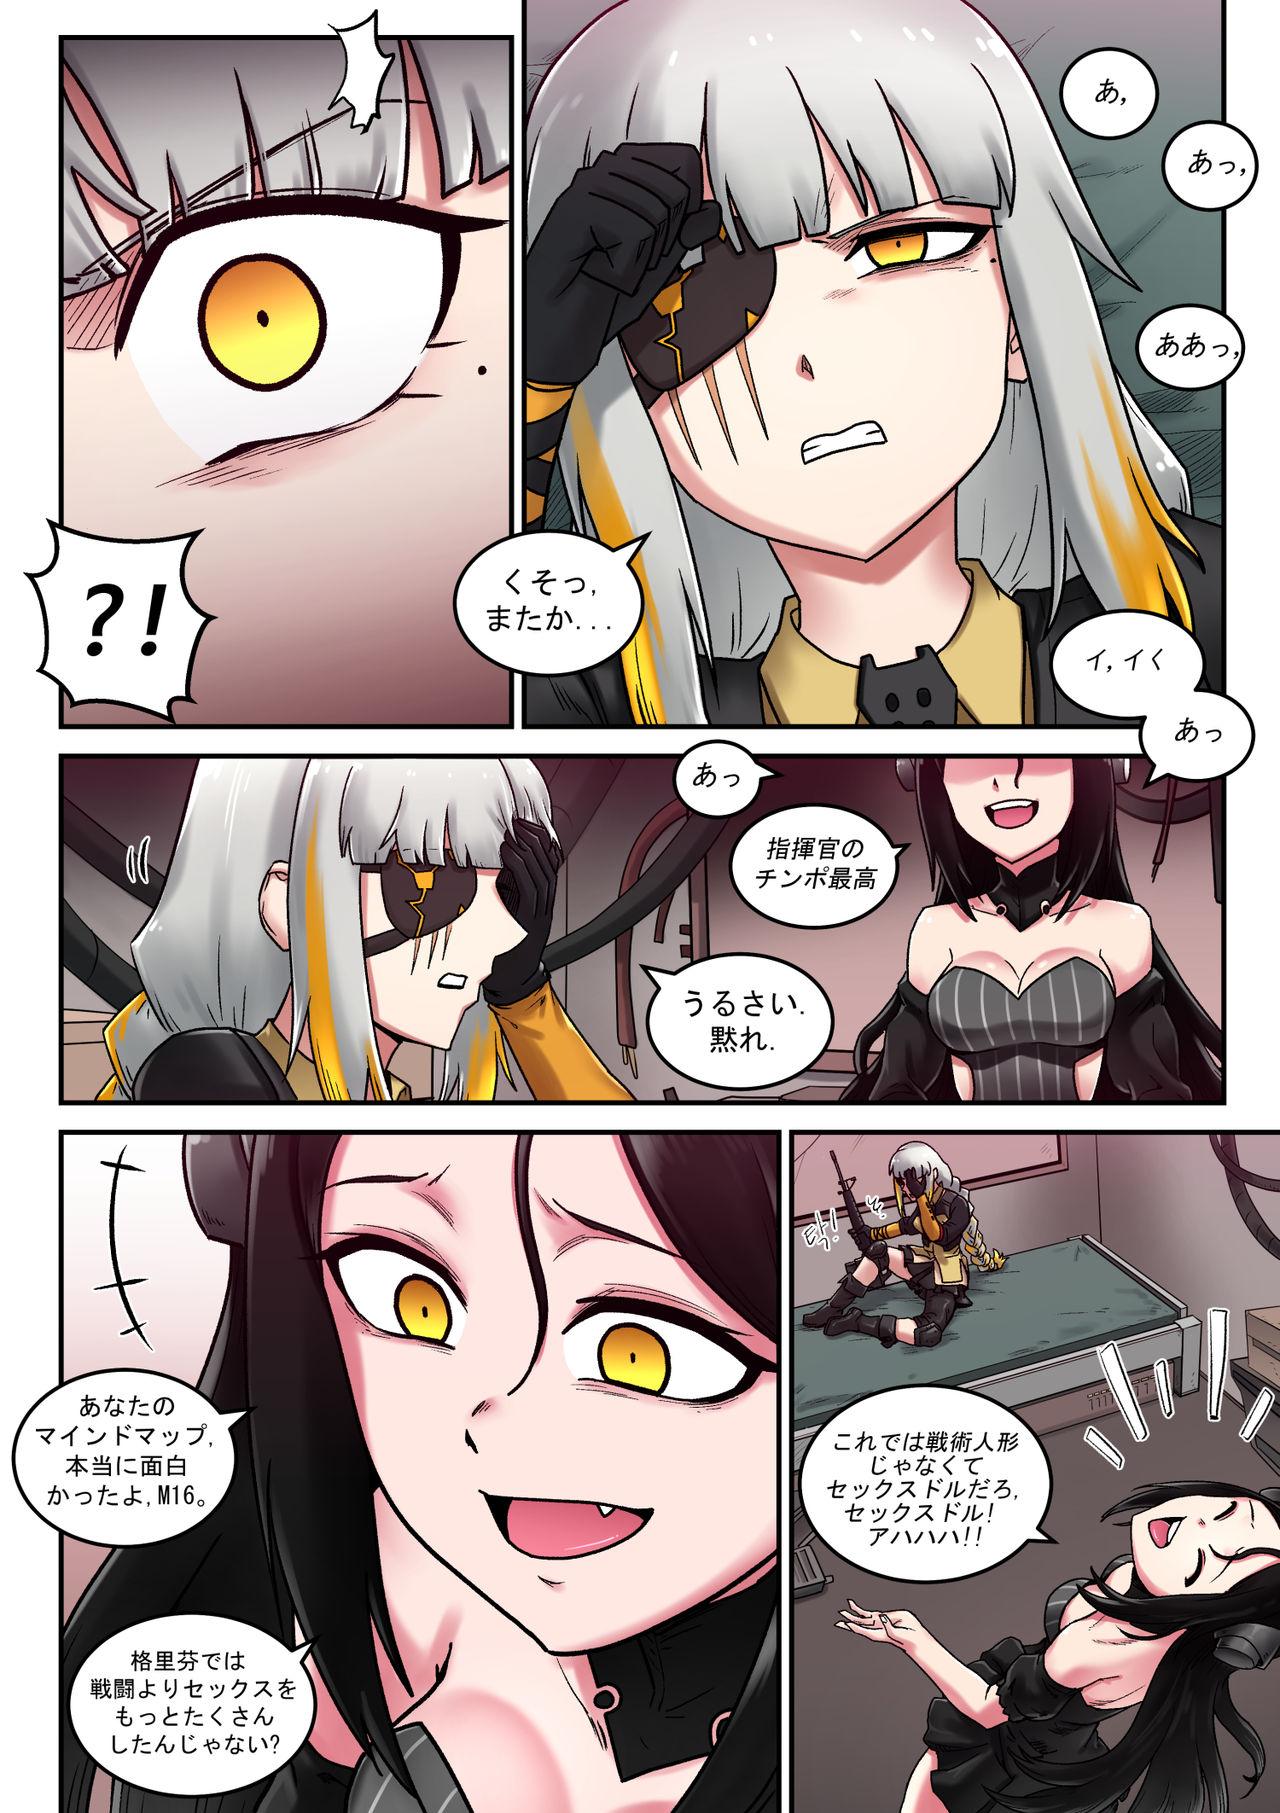 Blow Jobs M16 COMIC - Girls frontline Step Fantasy - Page 12